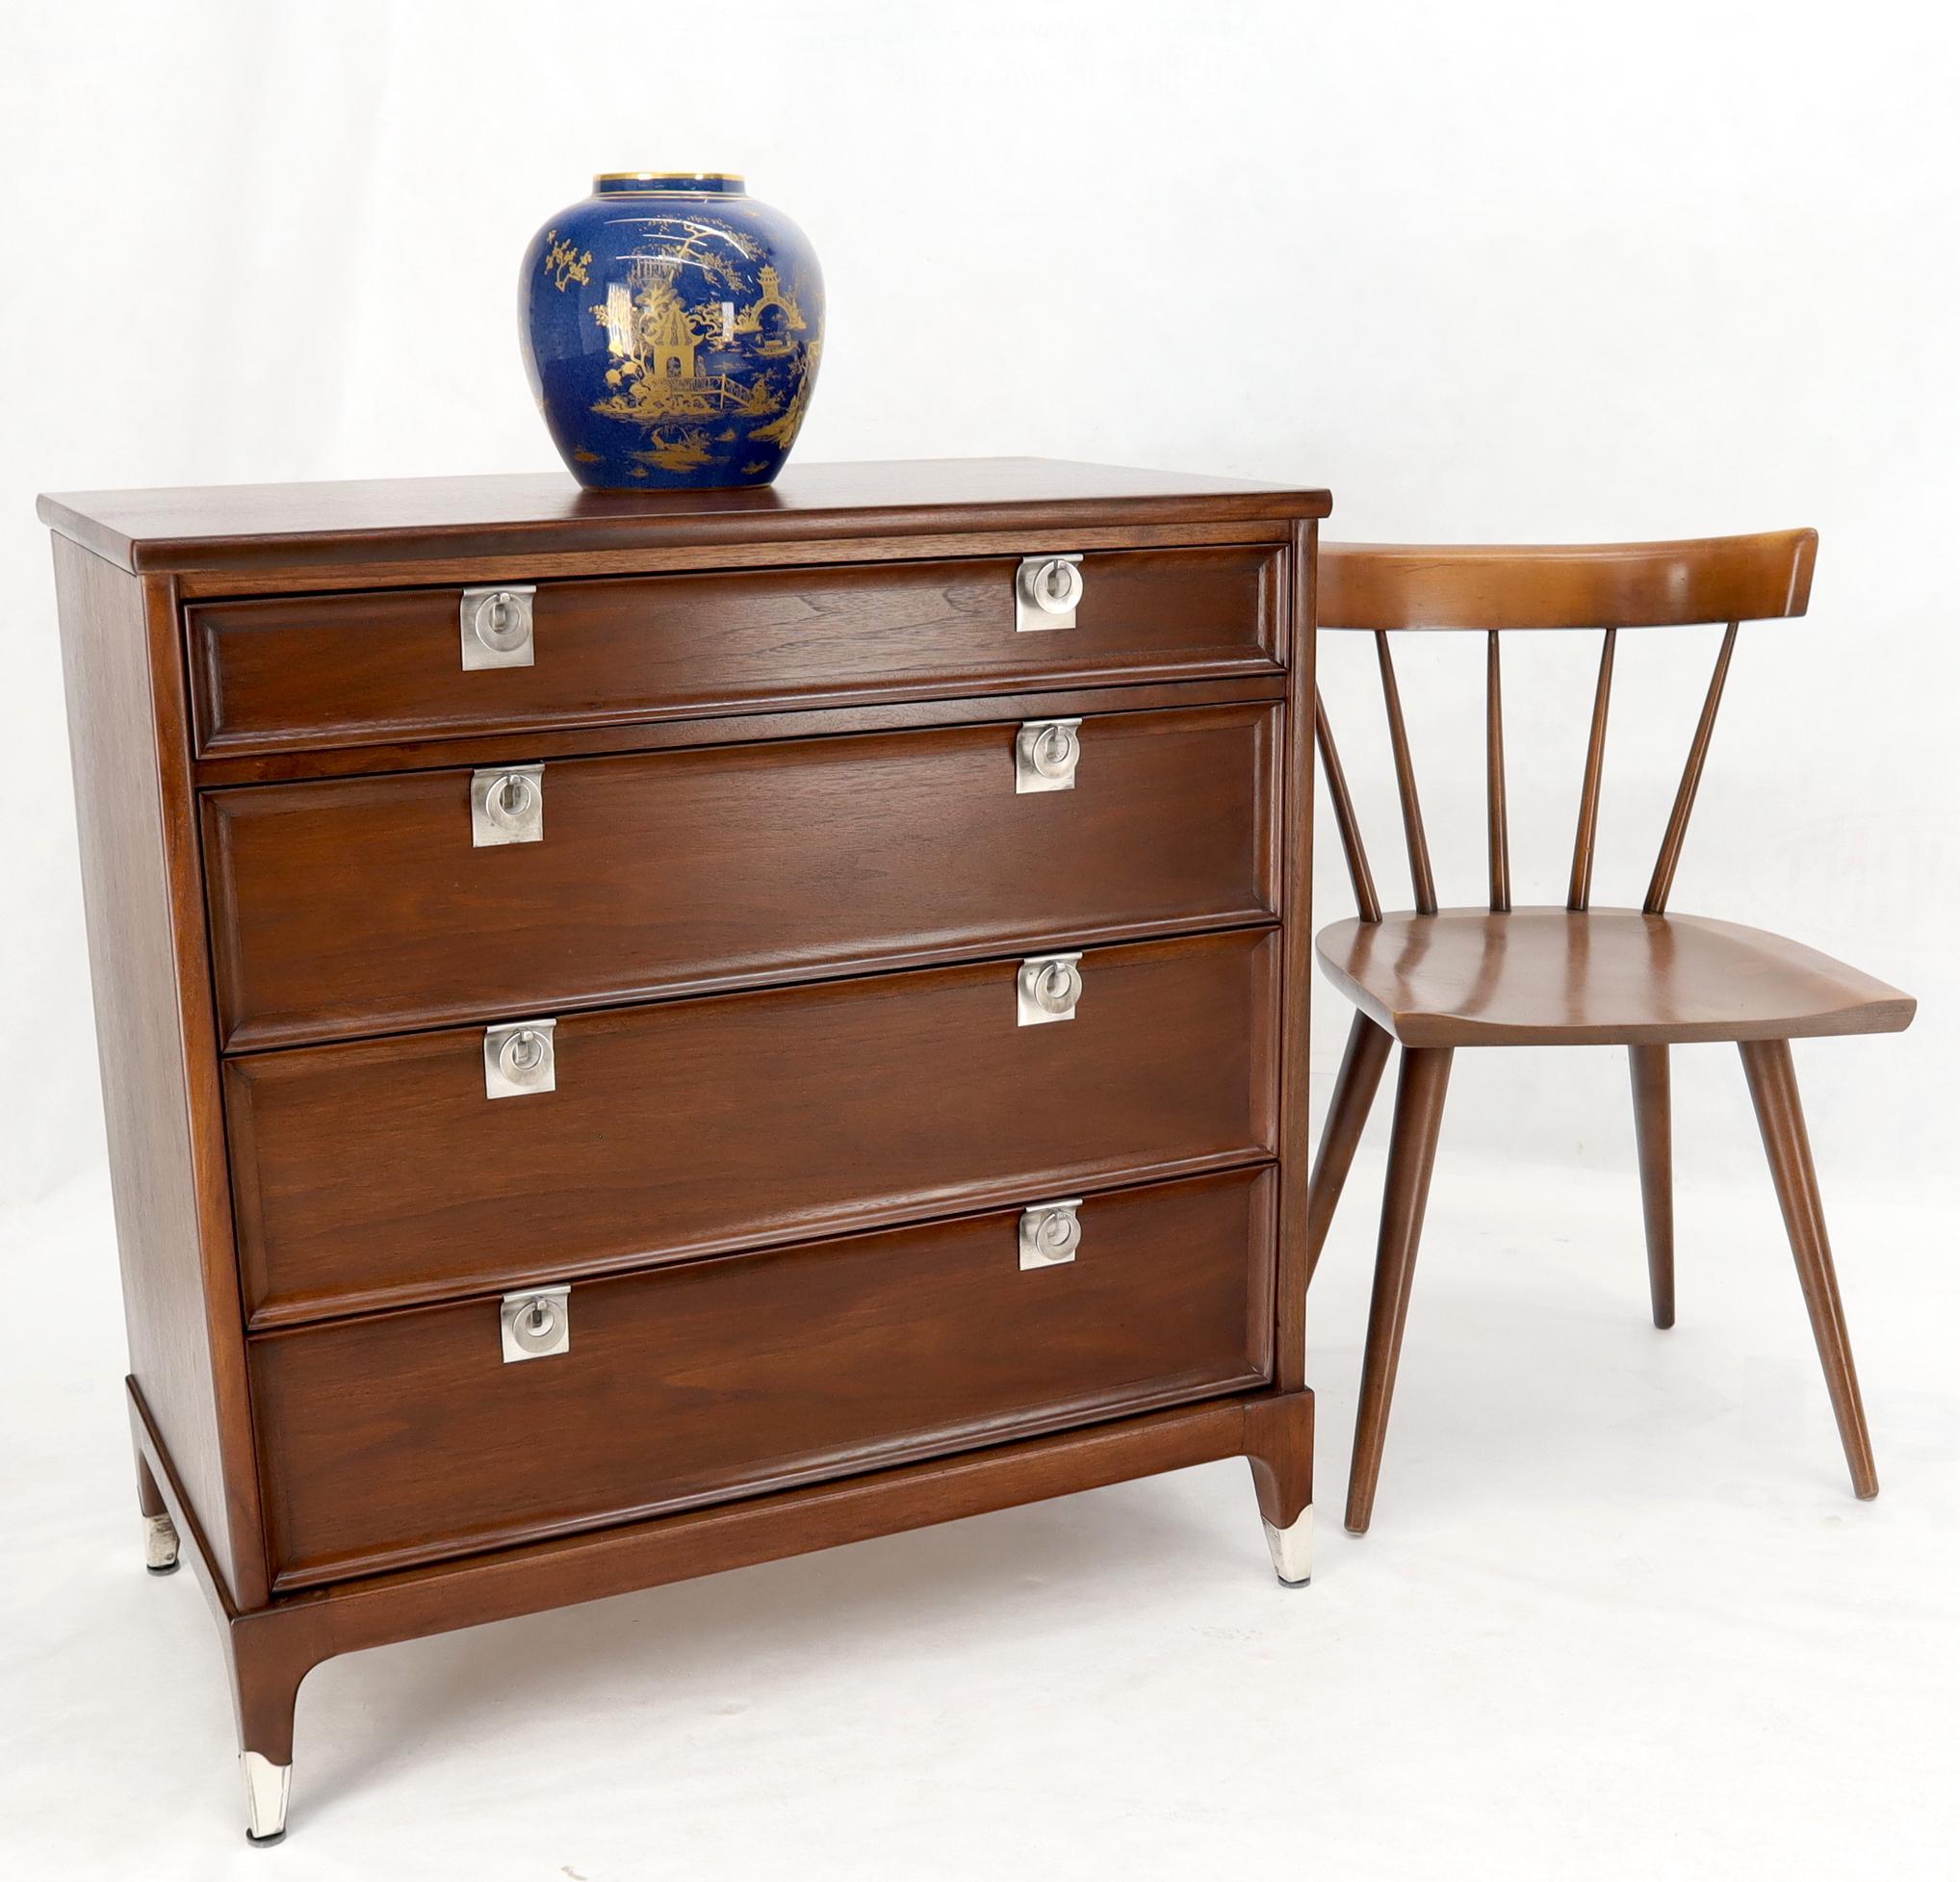 Mid-Century Modern walnut bachelor chest with drop pulls. Excellent condition. Gorgeous light espresso wood finish. Gibbings Kagan decor match.